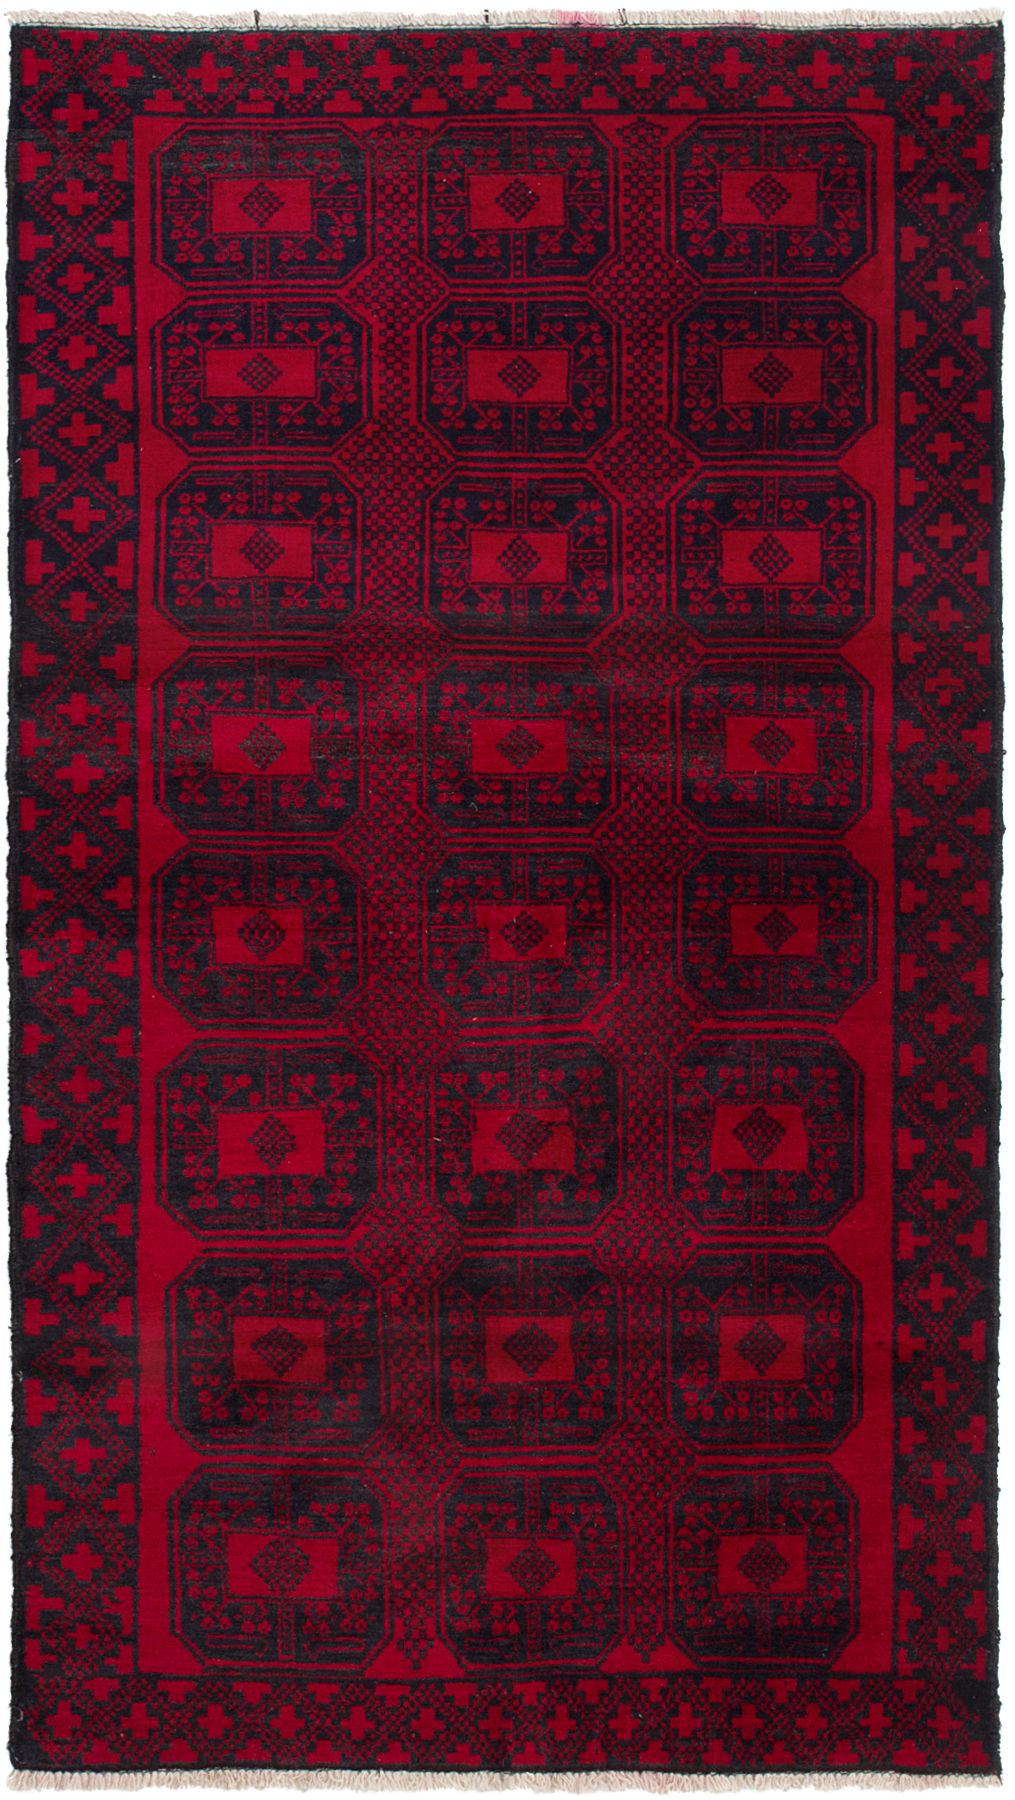 Hand-knotted Rizbaft Red Wool Rug 3'7" x 6'8"  Size: 3'7" x 6'8"  